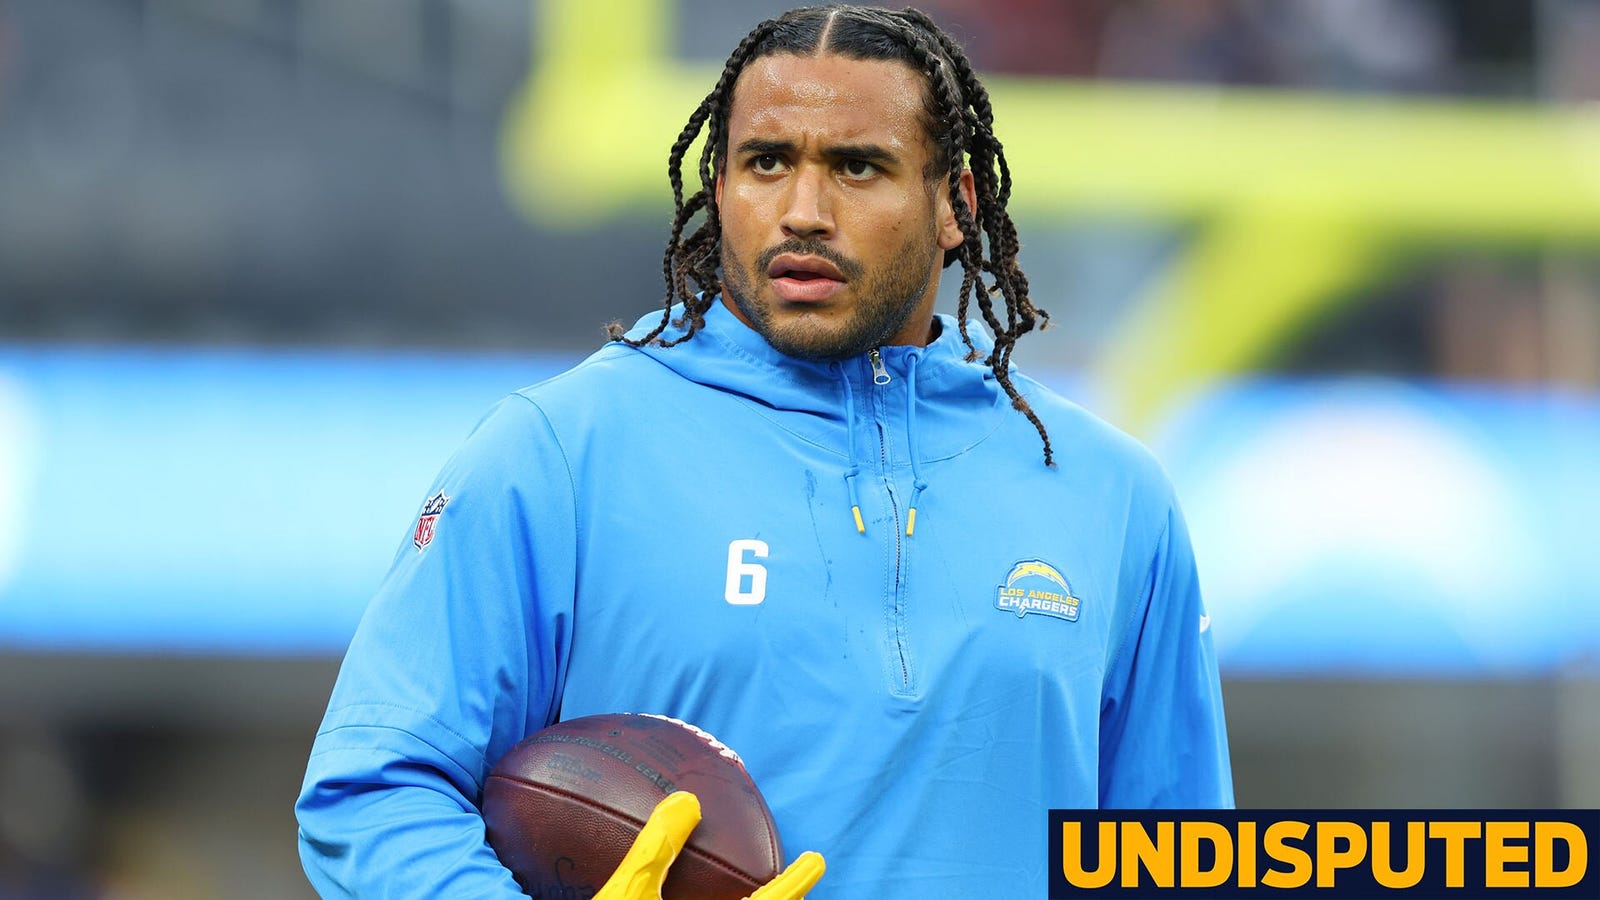 Cowboys sign former Chargers LB Eric Kendricks to one-year deal 